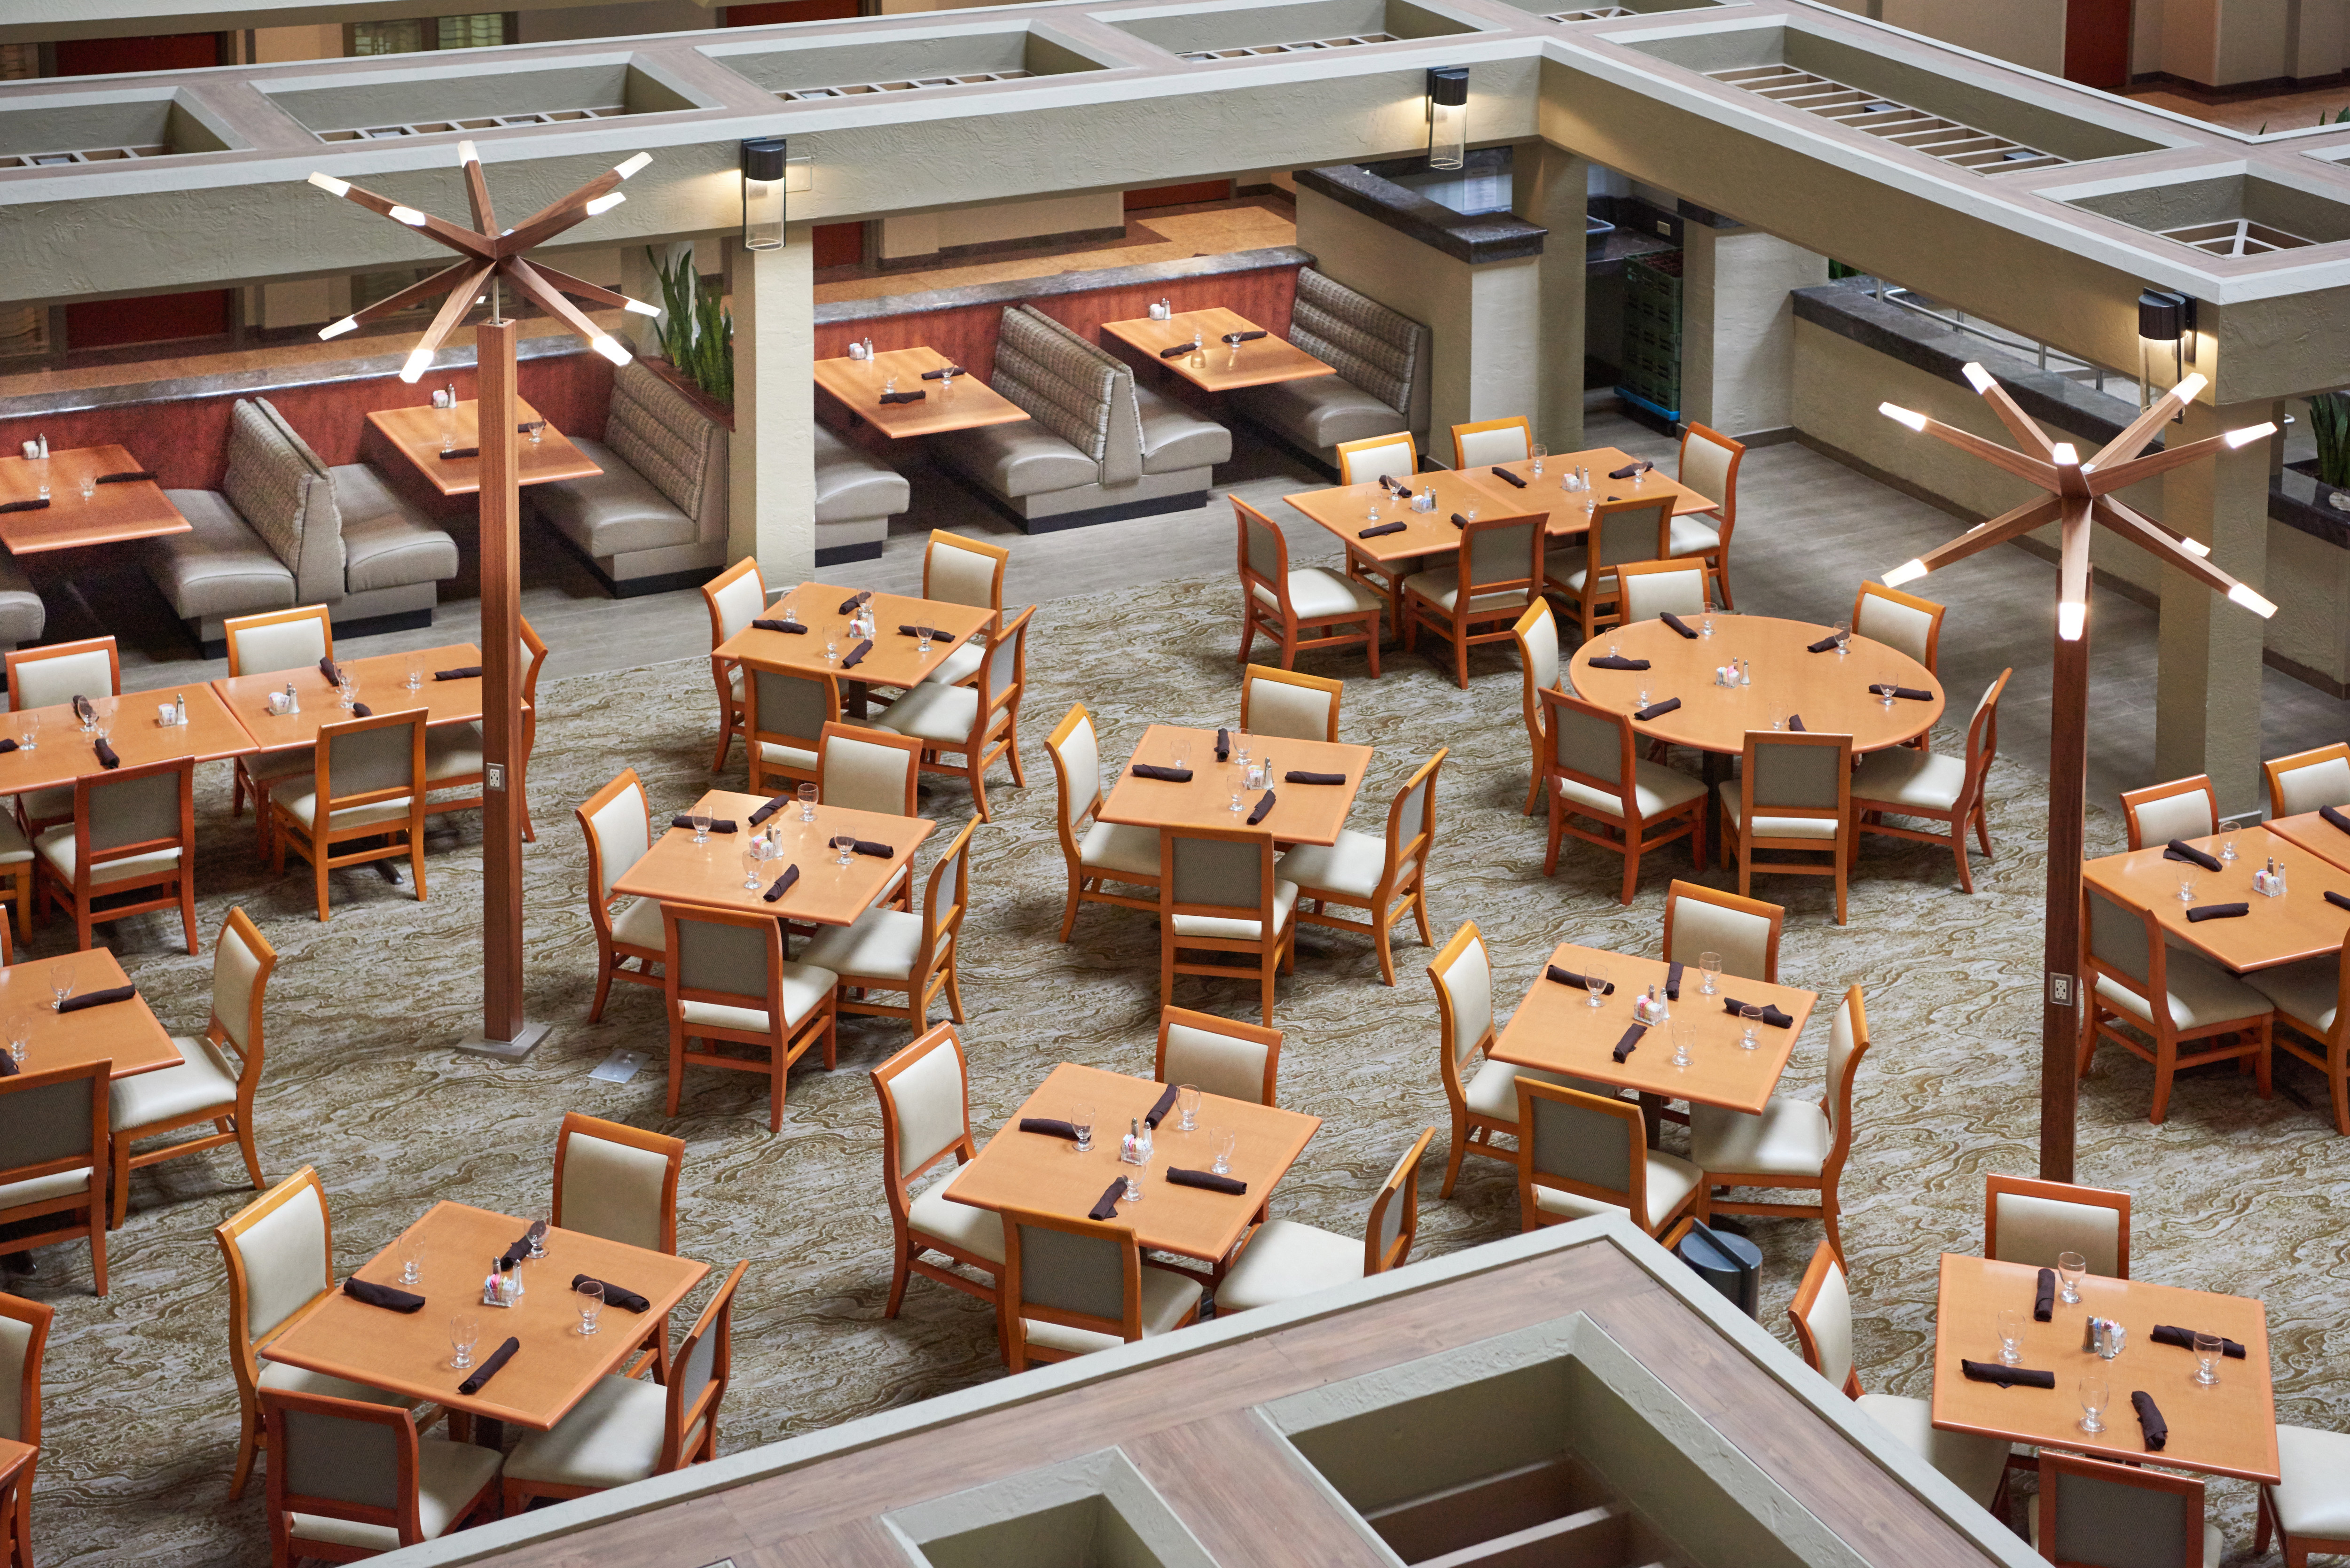 Overhead View of Dining Tables, Chairs and Booths at International Cafe Restaurant  